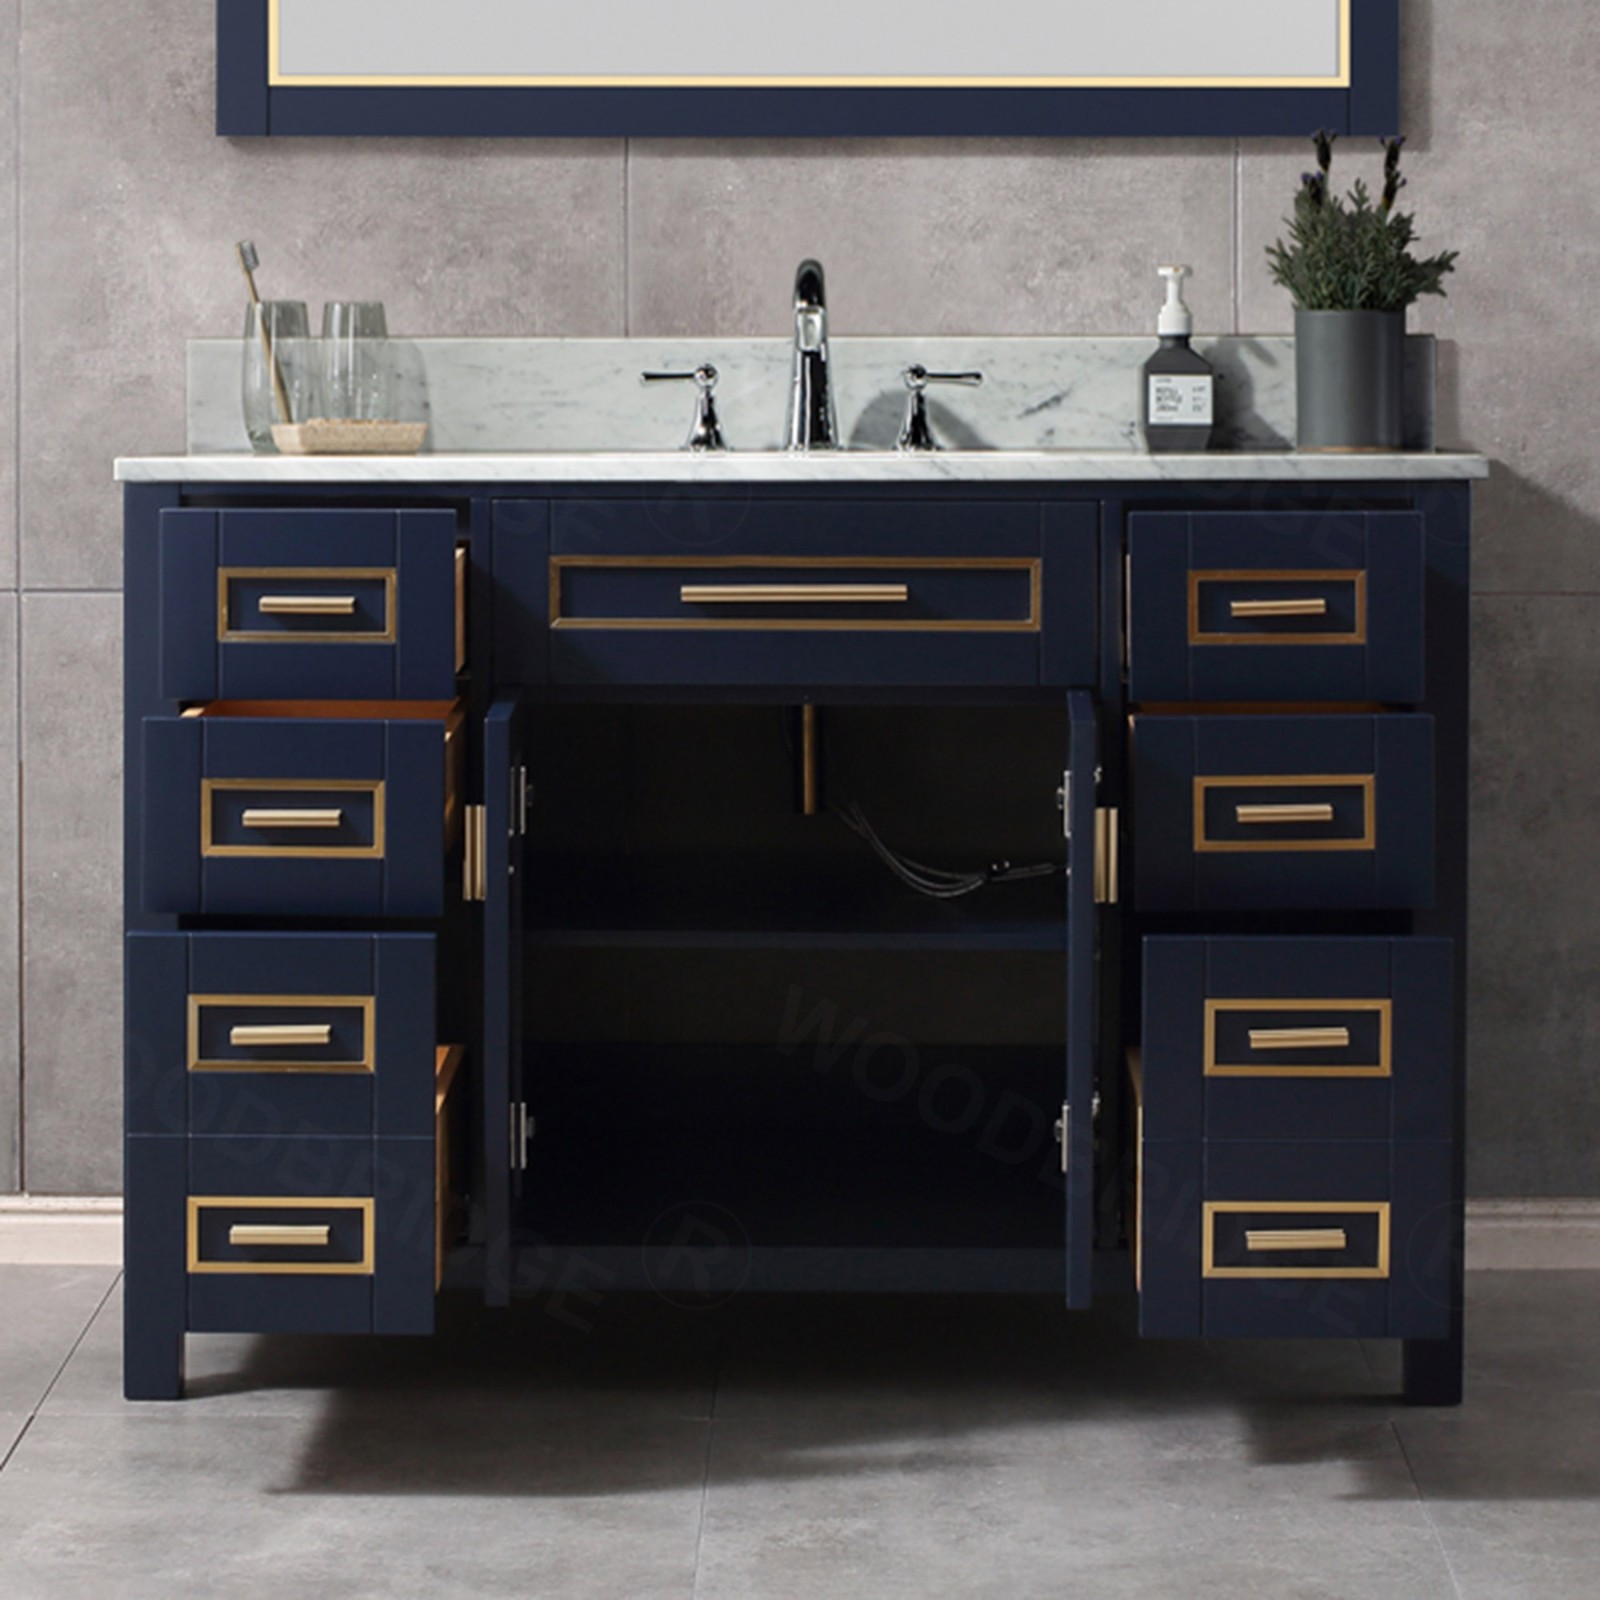  WOODBRIDGE Milan  49” Floor Mounted Single Basin Vanity Set with Solid Wood Cabinet in Navy Blue, and Carrara White Marble Vanity Top with Pre-installed Undermount Rectangle Bathroom Sink in White, Pre-Drilled 3-Hole for 8-inch Widespread Faucet_4736